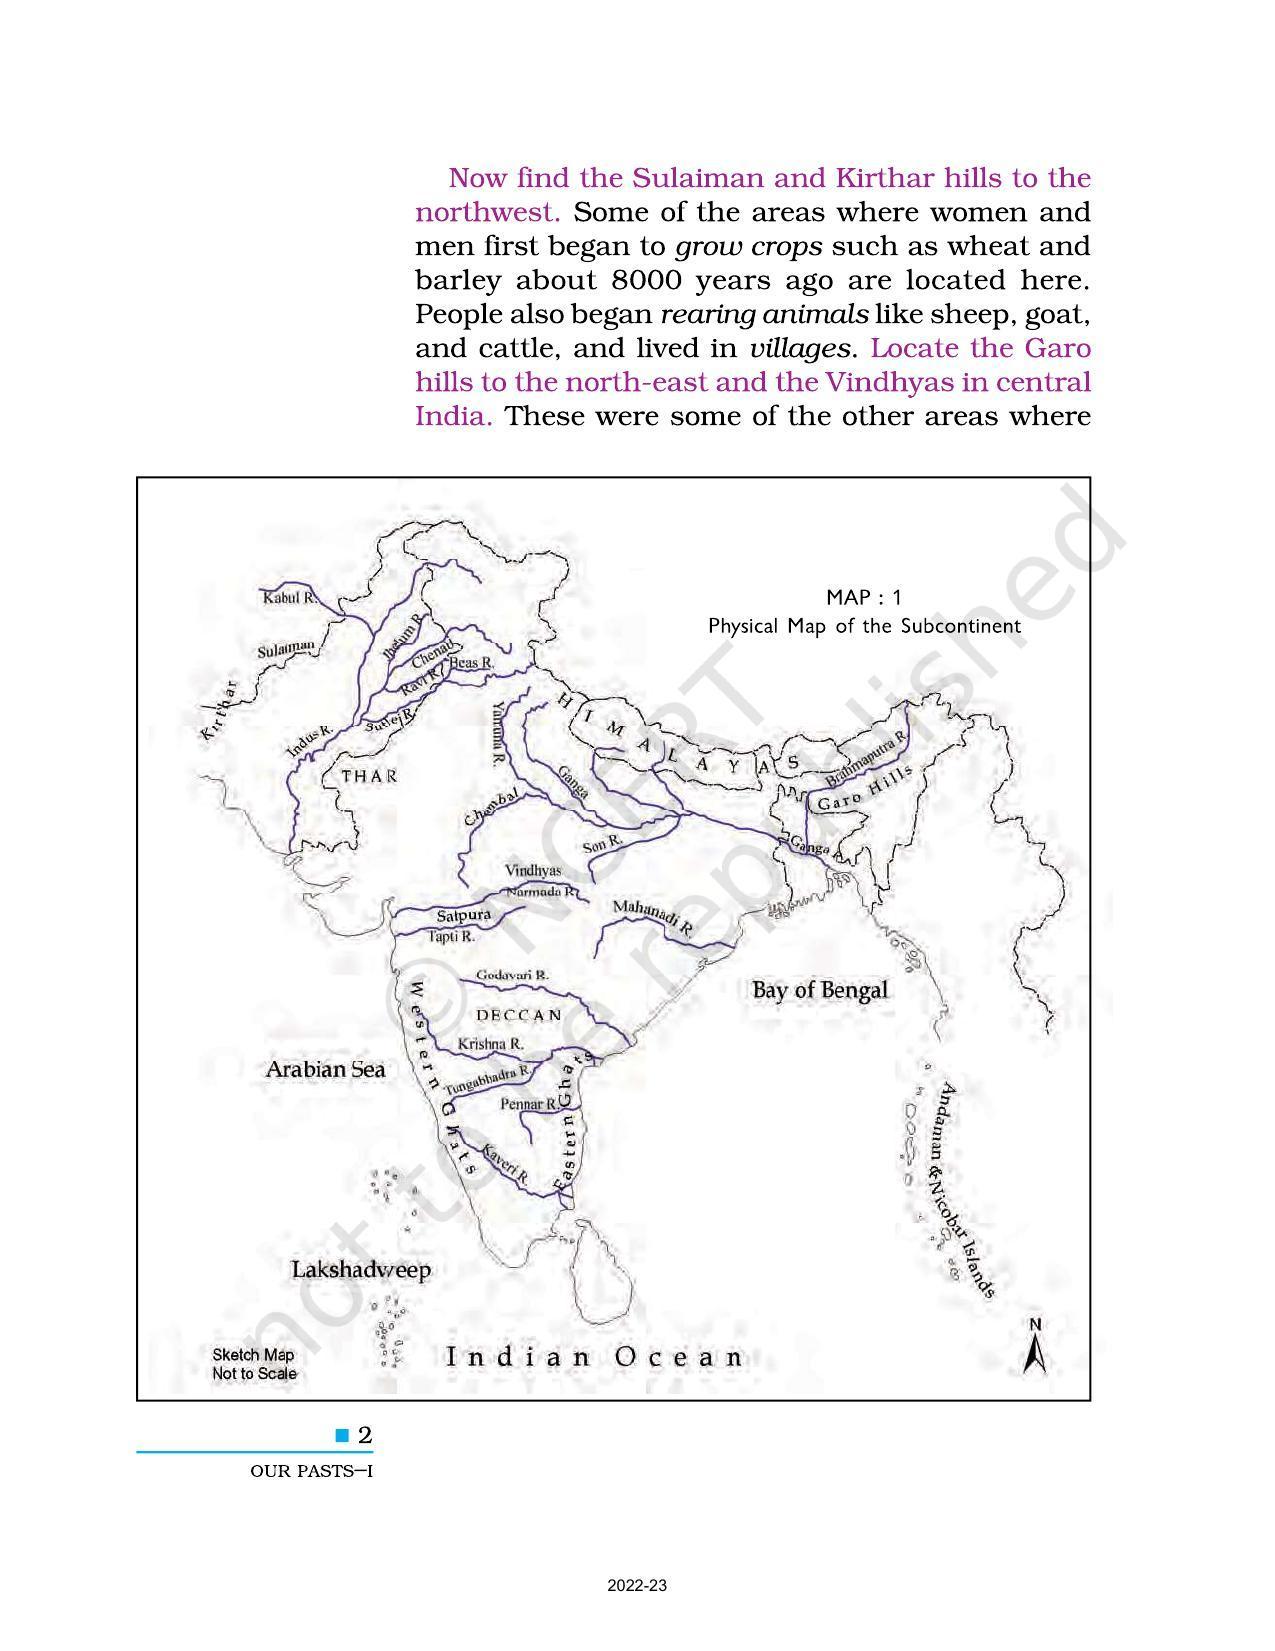 NCERT Book for Class 6 History (Social Science) : Chapter 1-What Where, How, and When? - Page 2